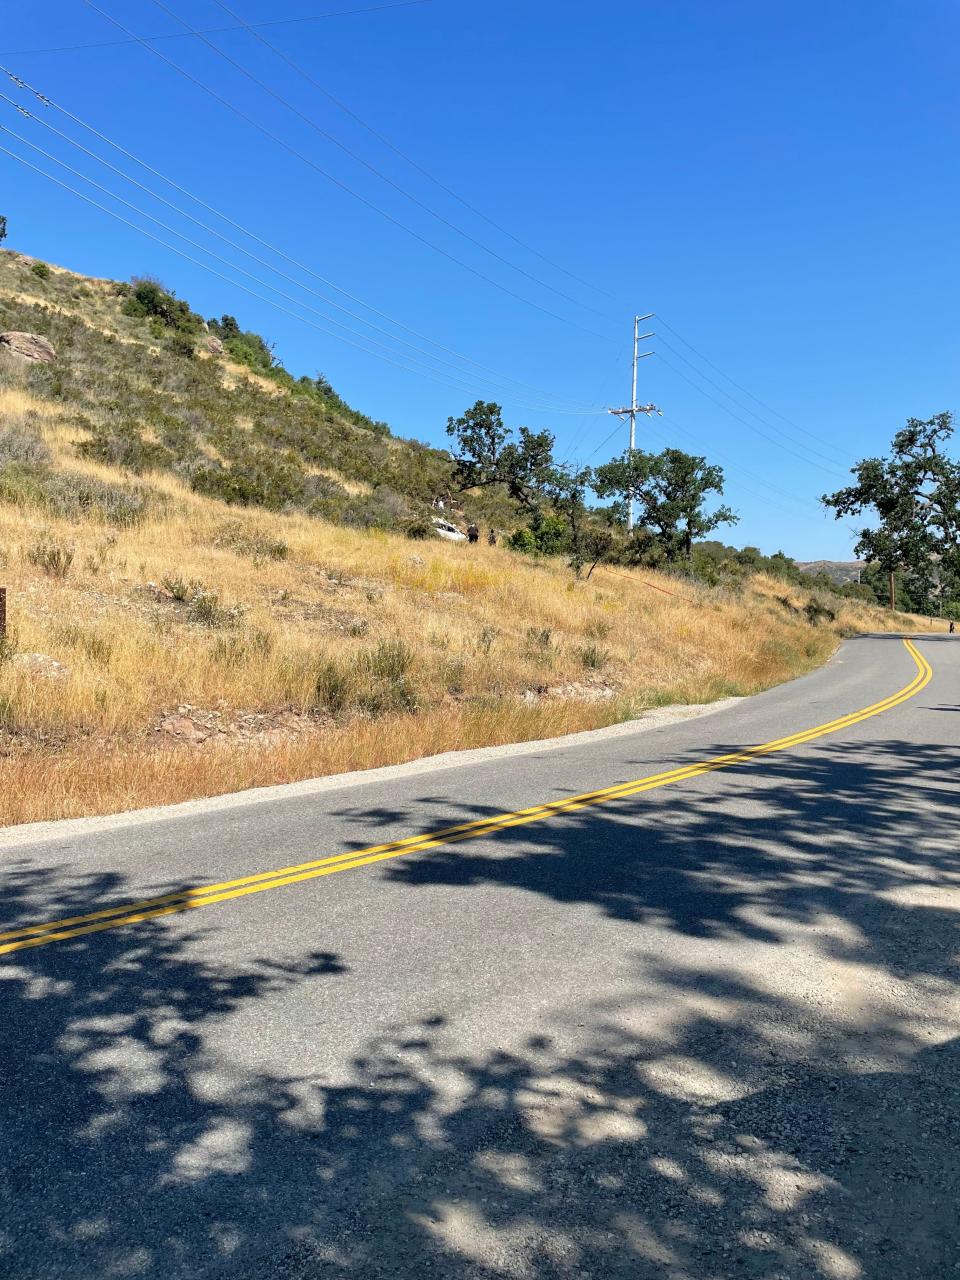 In June, a Los Angeles man died along Westlake Boulevard, south of Potrero Road, when his car hit and embankment and ended up on the hillside. Early Saturday, a Tarzana man died along the route when his car hit an embankment and overturned on Westlake Boulevard.